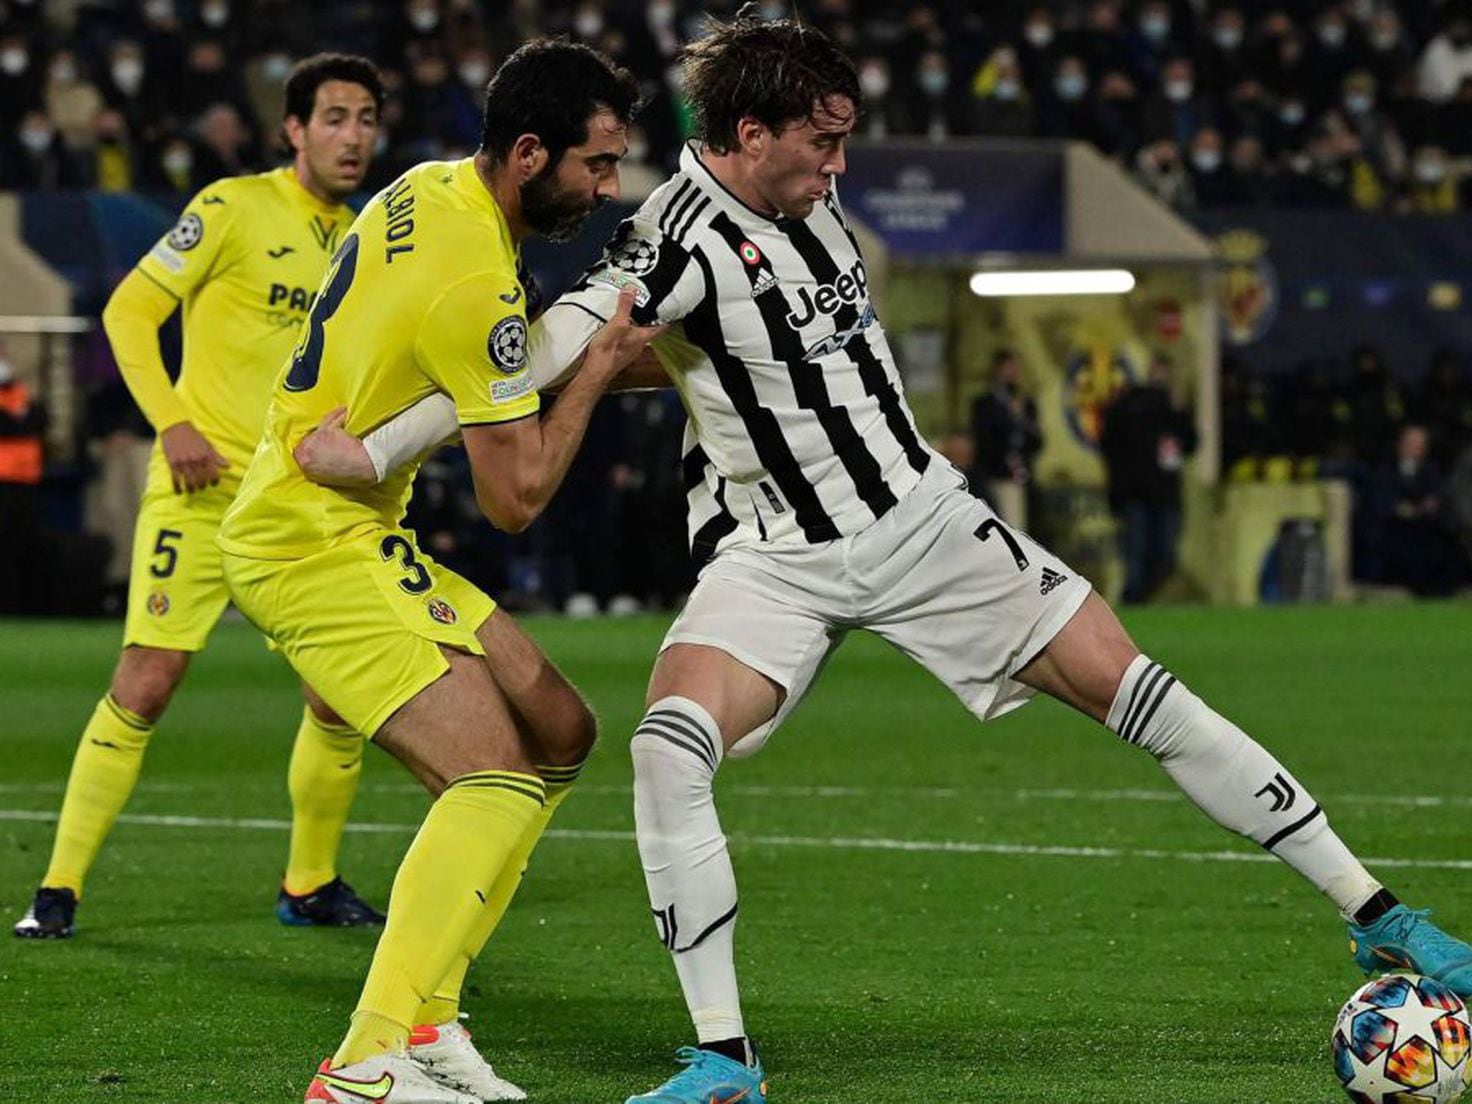 Villarreal vs Juventus Preview: How to Watch, Team News & Prediction